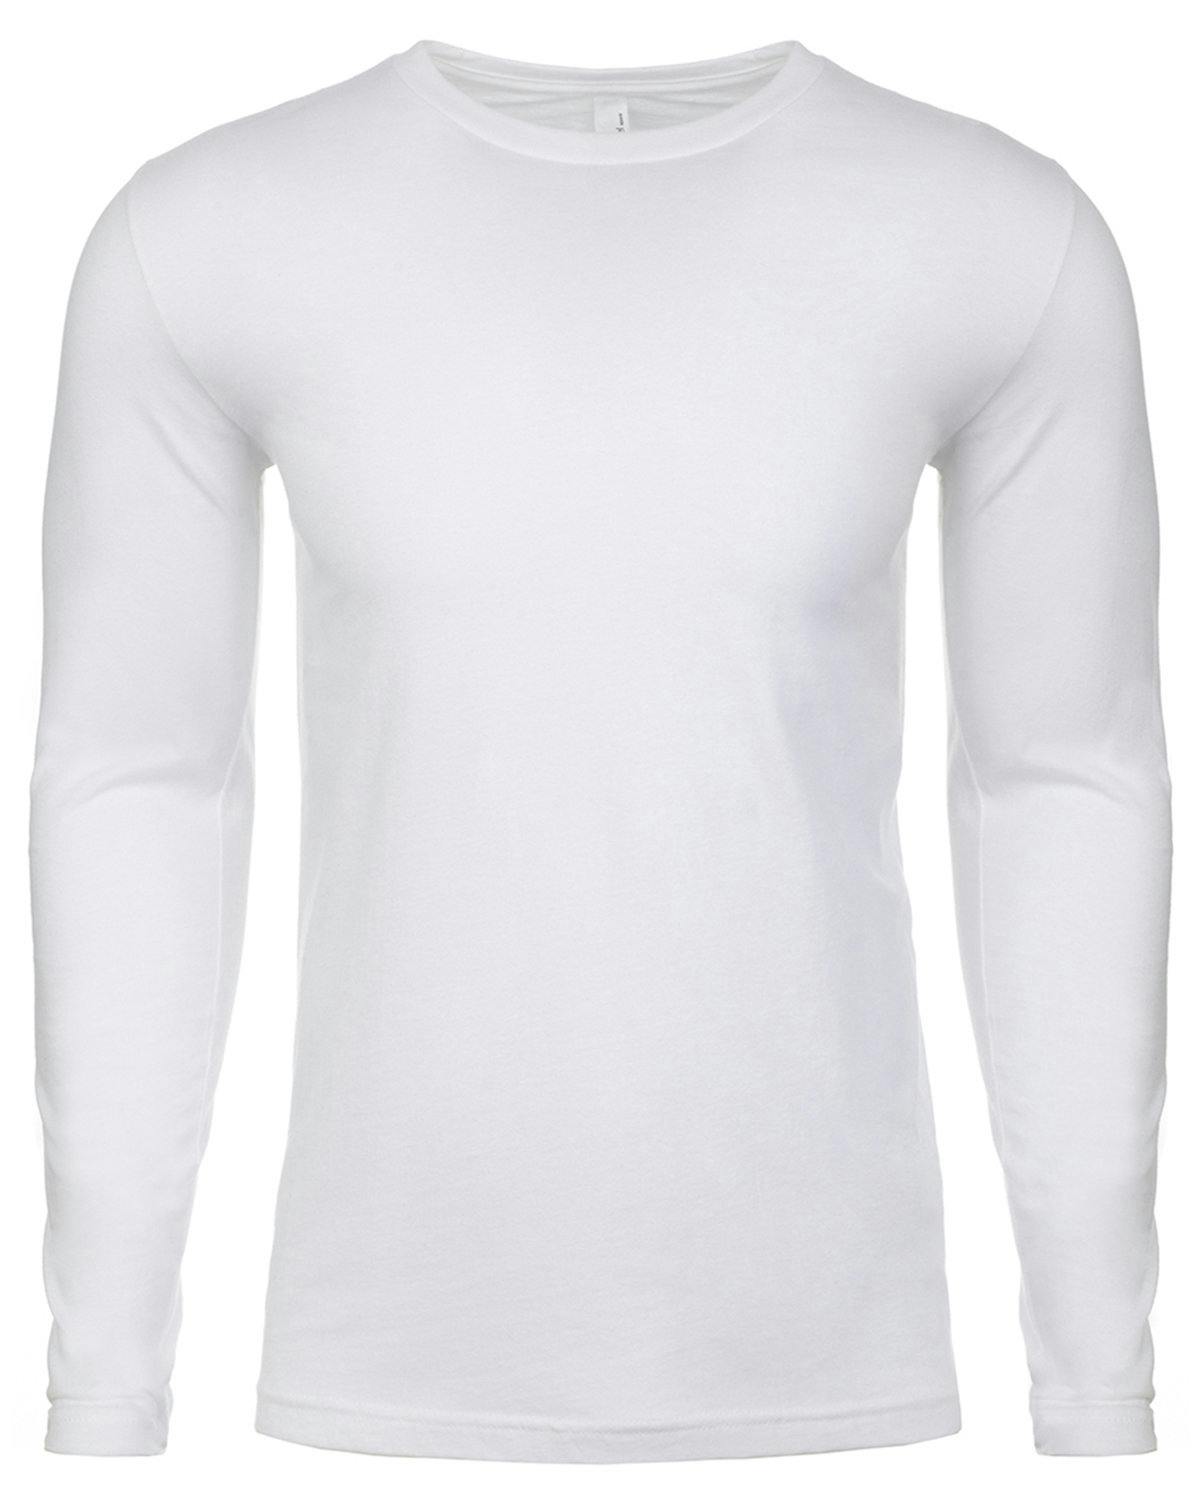 Image for Men's Cotton Long-Sleeve Crew